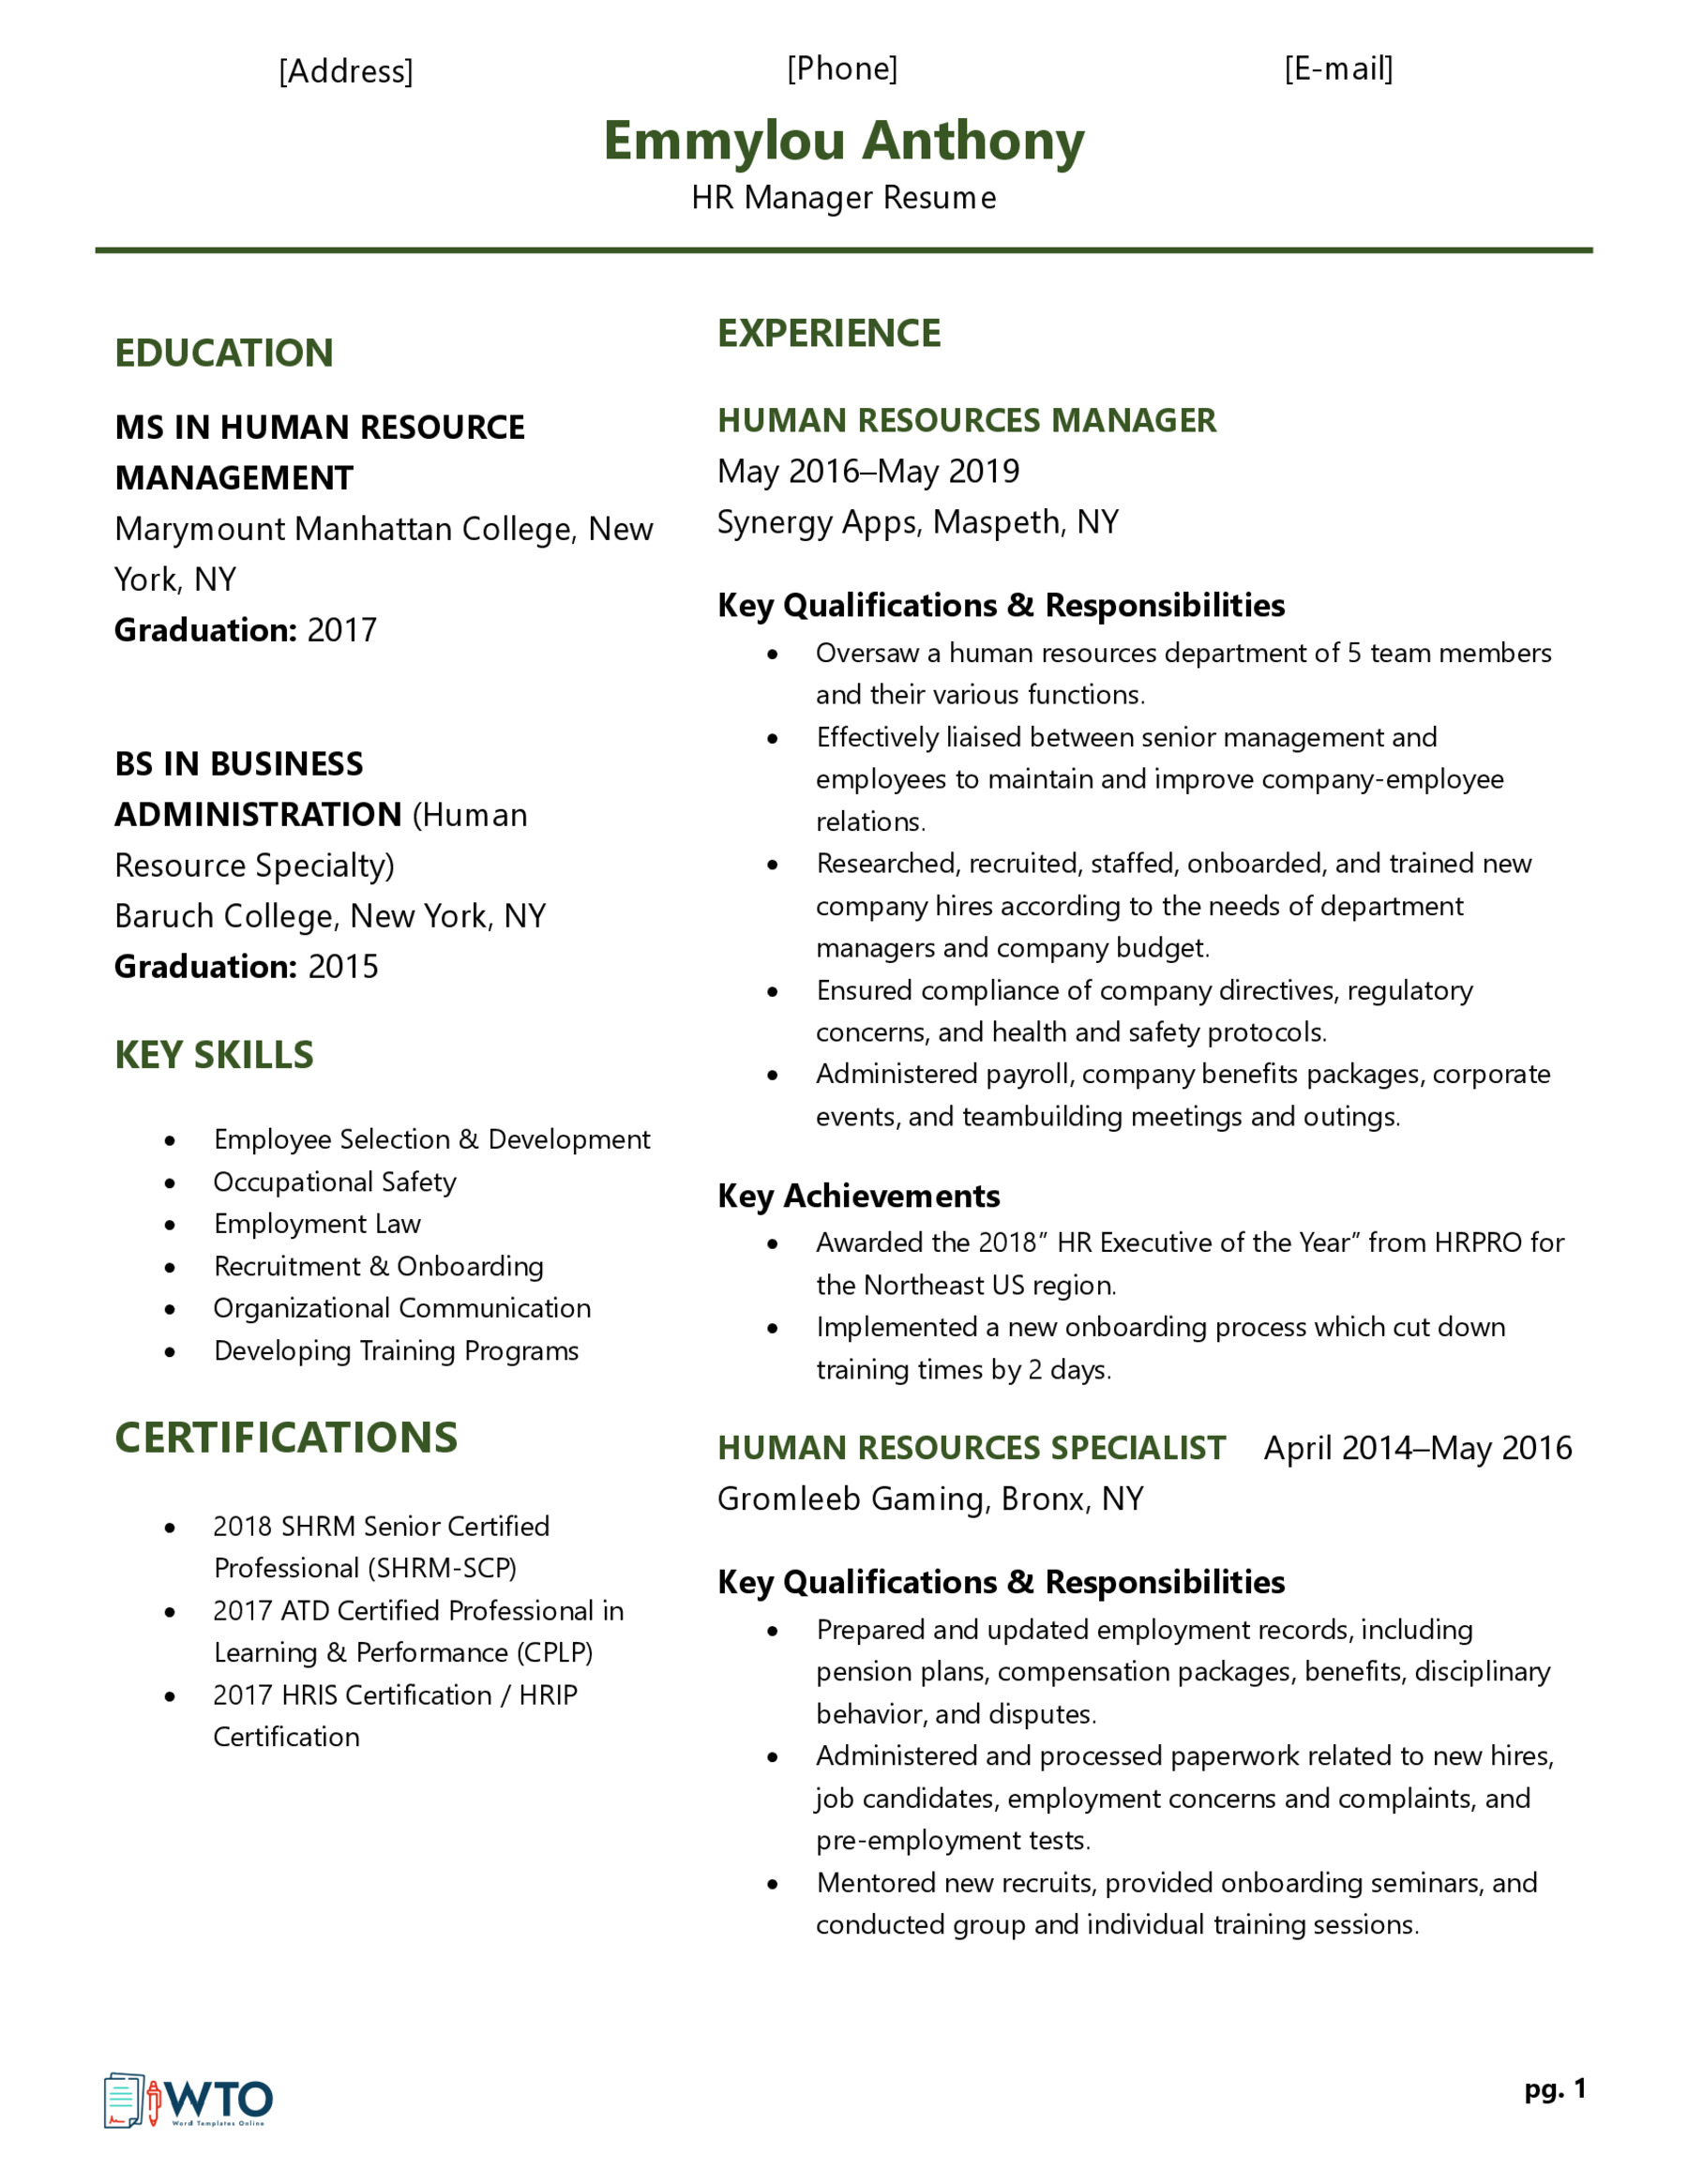 HR Manager Resume Example - Professional Sample